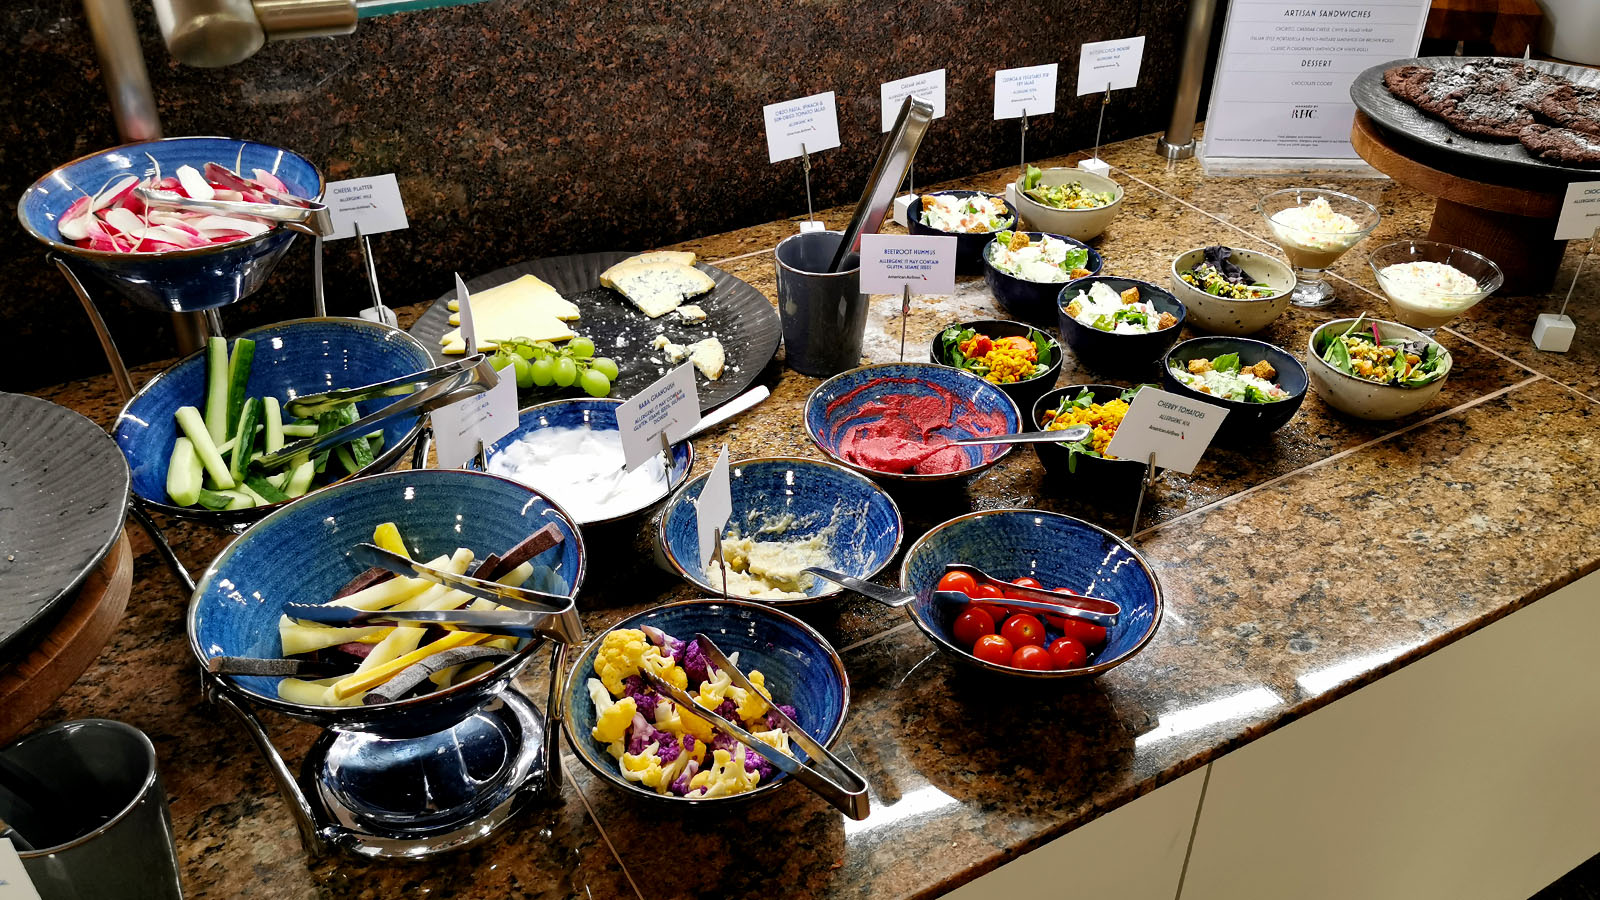 Buffet in the American Airlines International First Class Lounge, London Heathrow